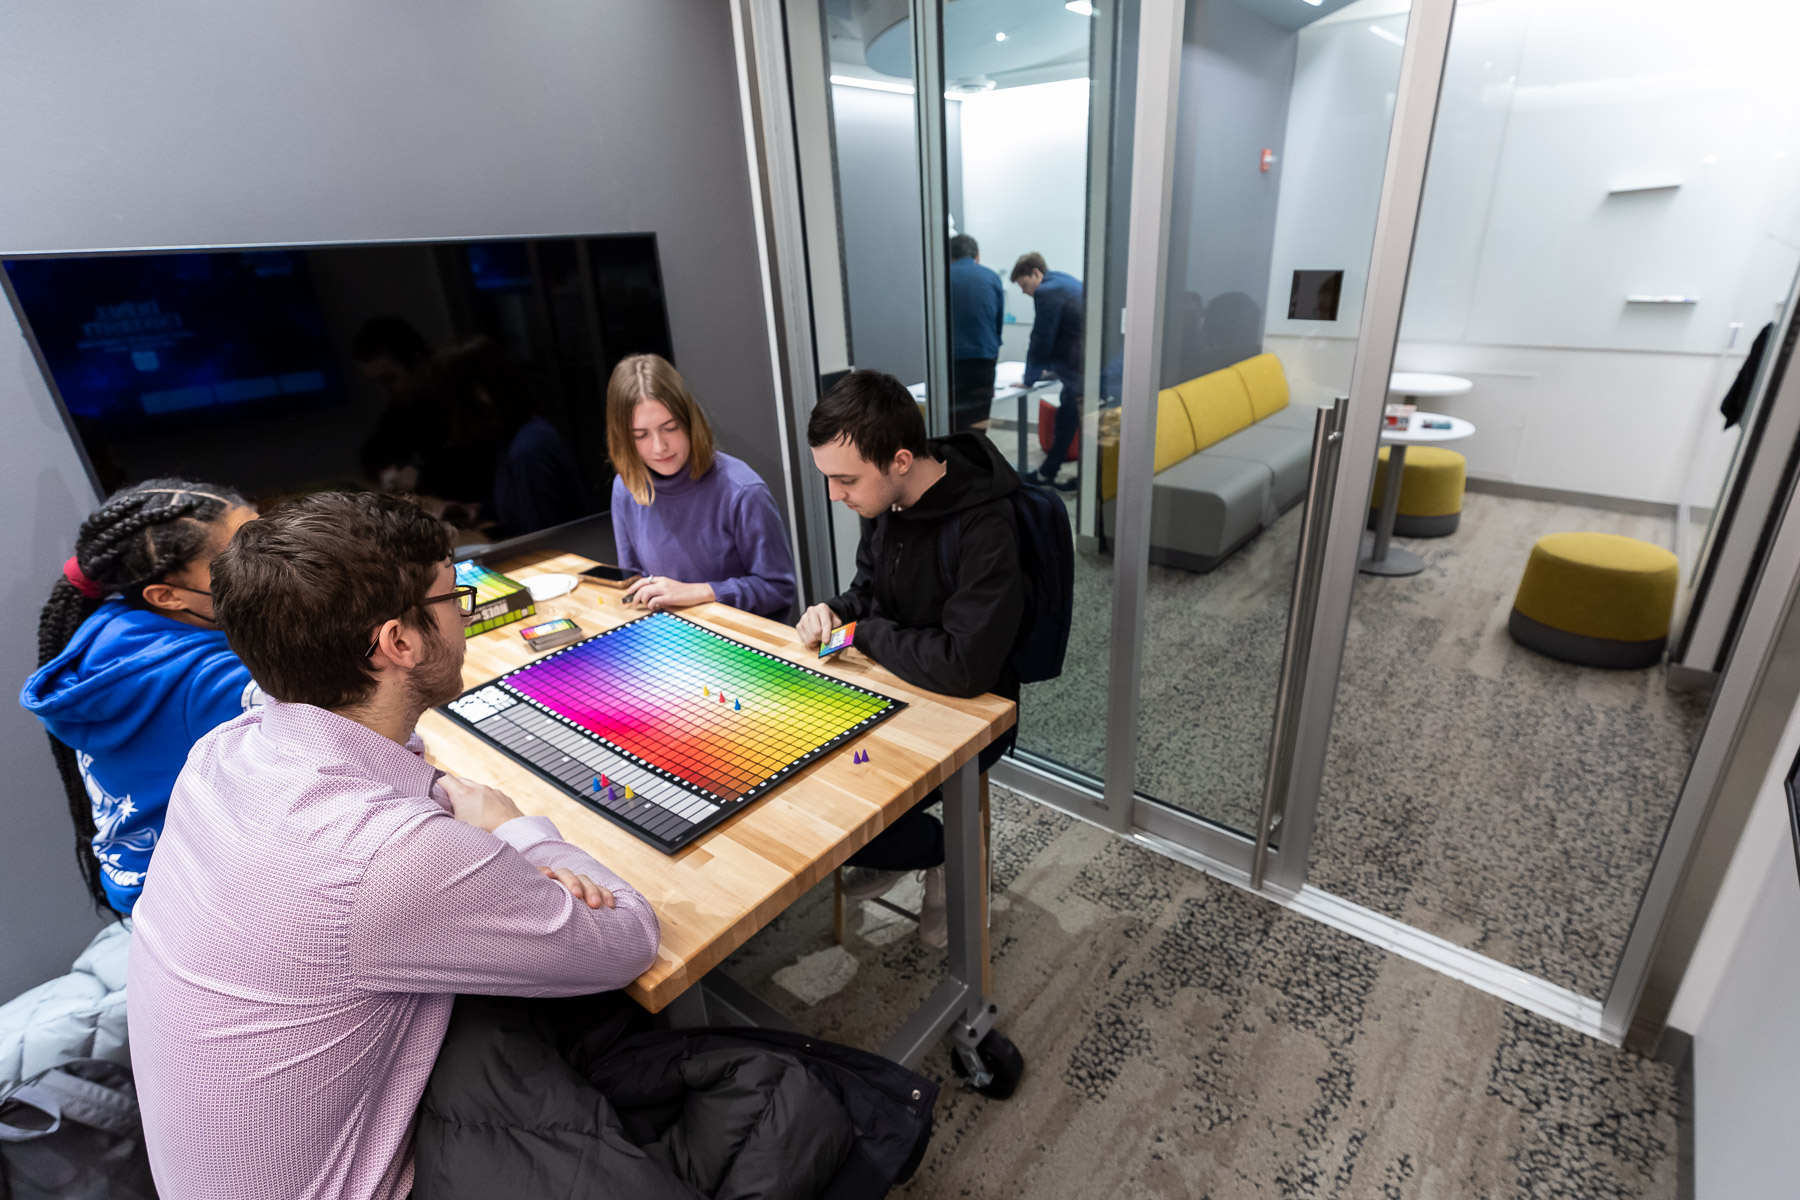 The Jarvis Center provides nearly 8,000 square feet of open, collaborative space where students and faculty come together to ideate and innovate.